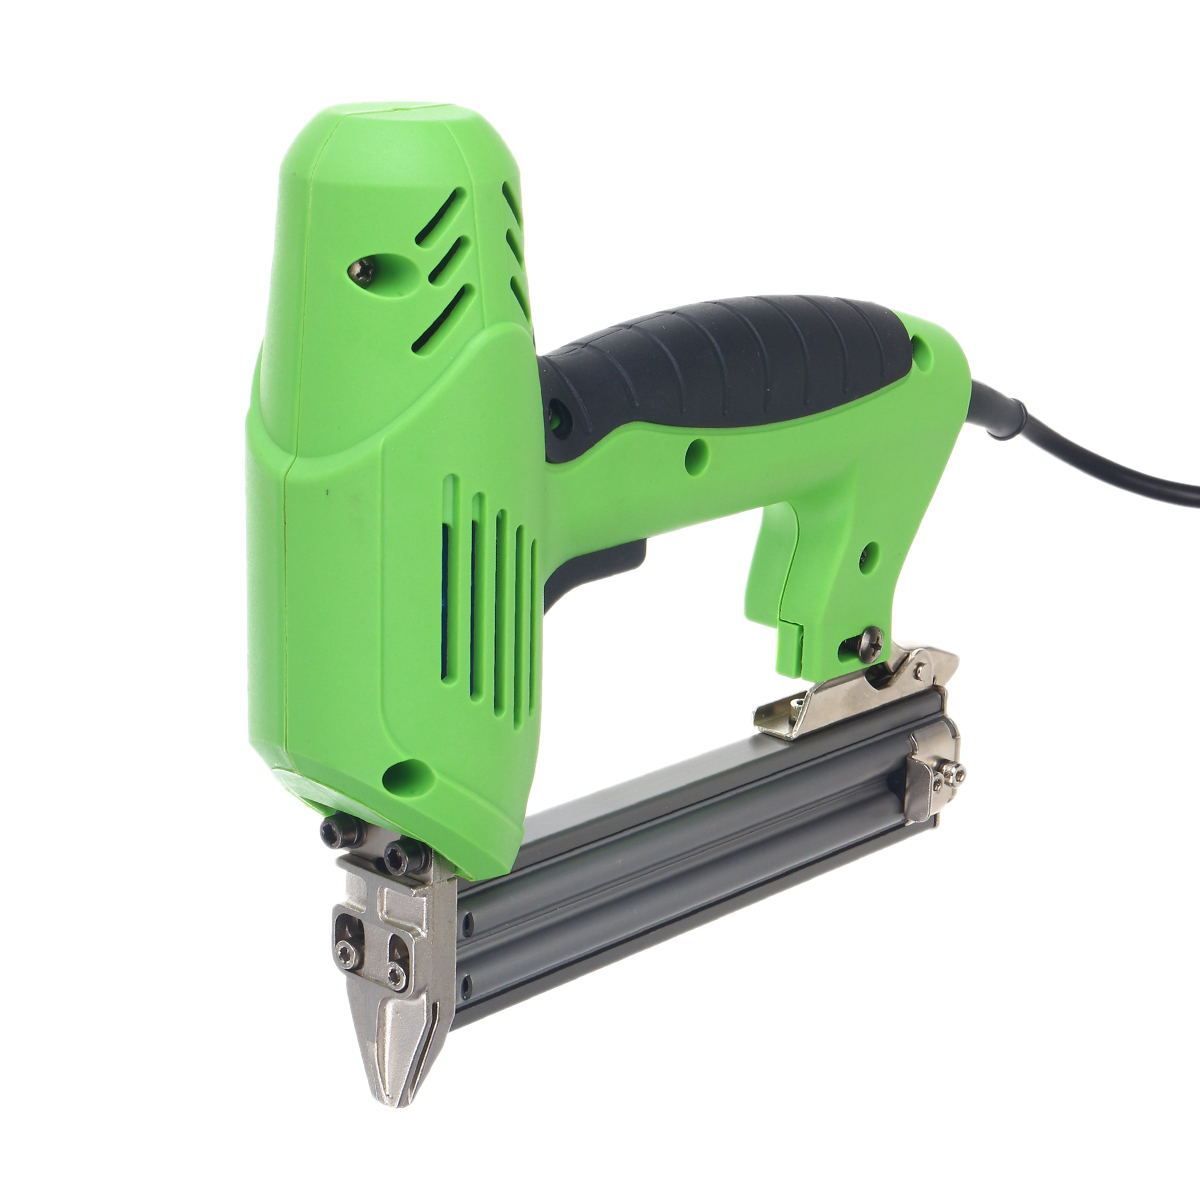 Find 220V Electric Tacker Stapler Power Tools Furniture Staple Guns for Frame with Nails and Woodworking Nail Guns for Sale on Gipsybee.com with cryptocurrencies